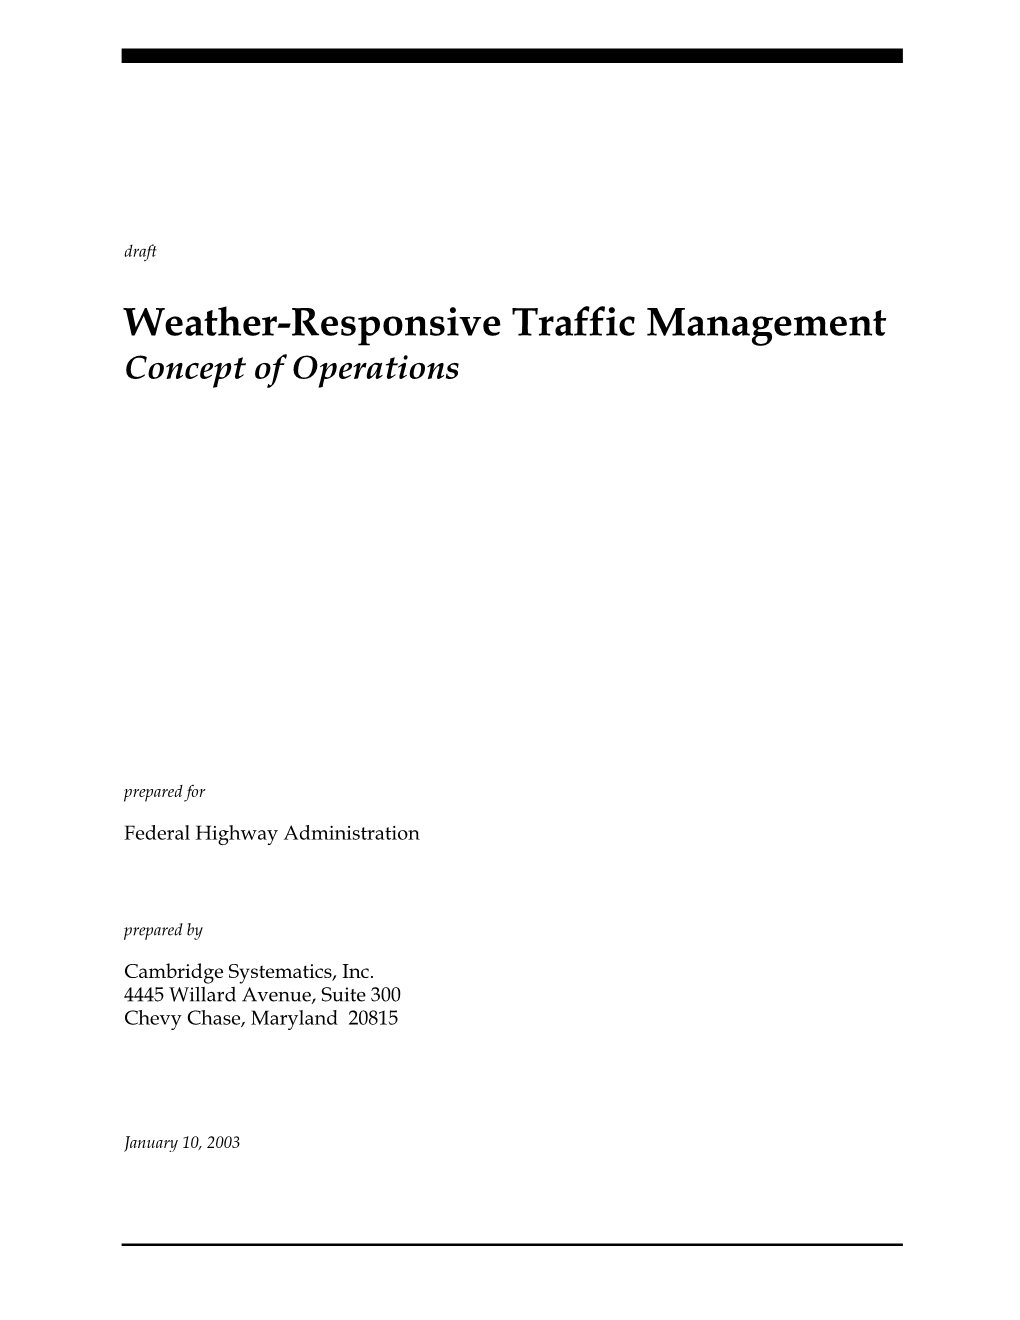 Weather-Responsive Traffic Management Concept of Operations